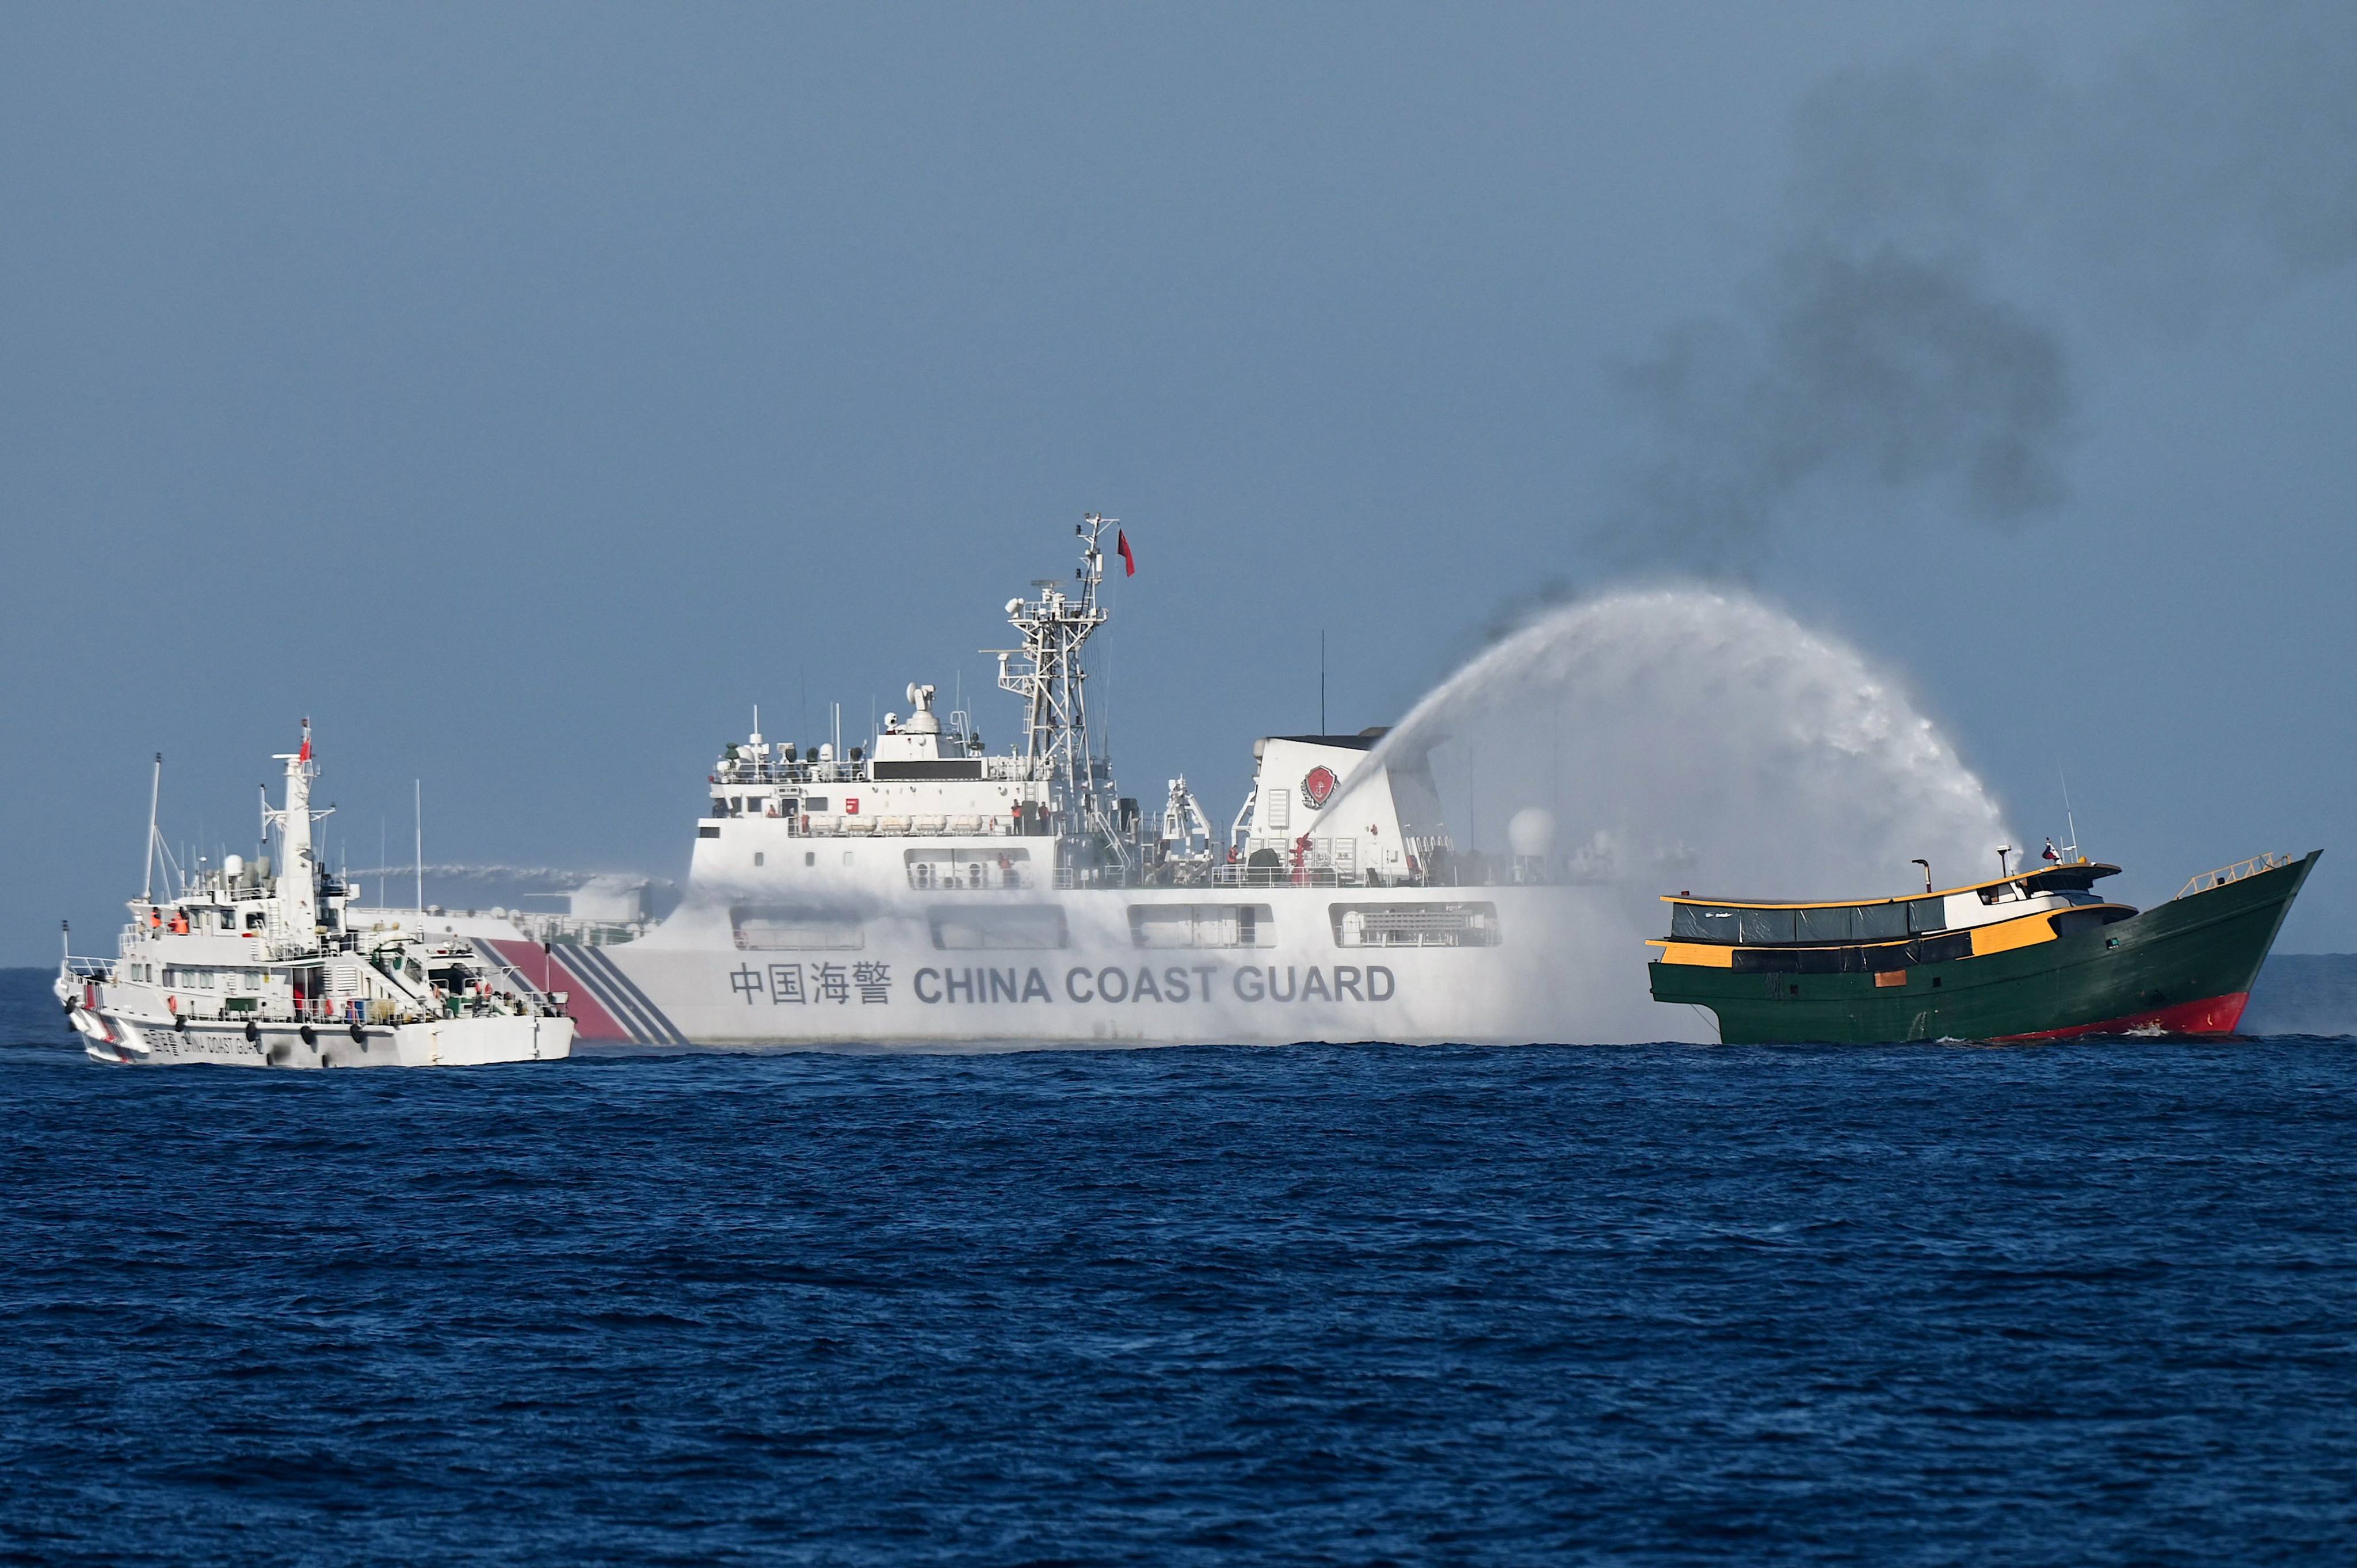 Chinese coastguard ships deploy water cannons at a Philippine vessel during a supply mission in March to Second Thomas Shoal in the South China Sea. Photo: AFP